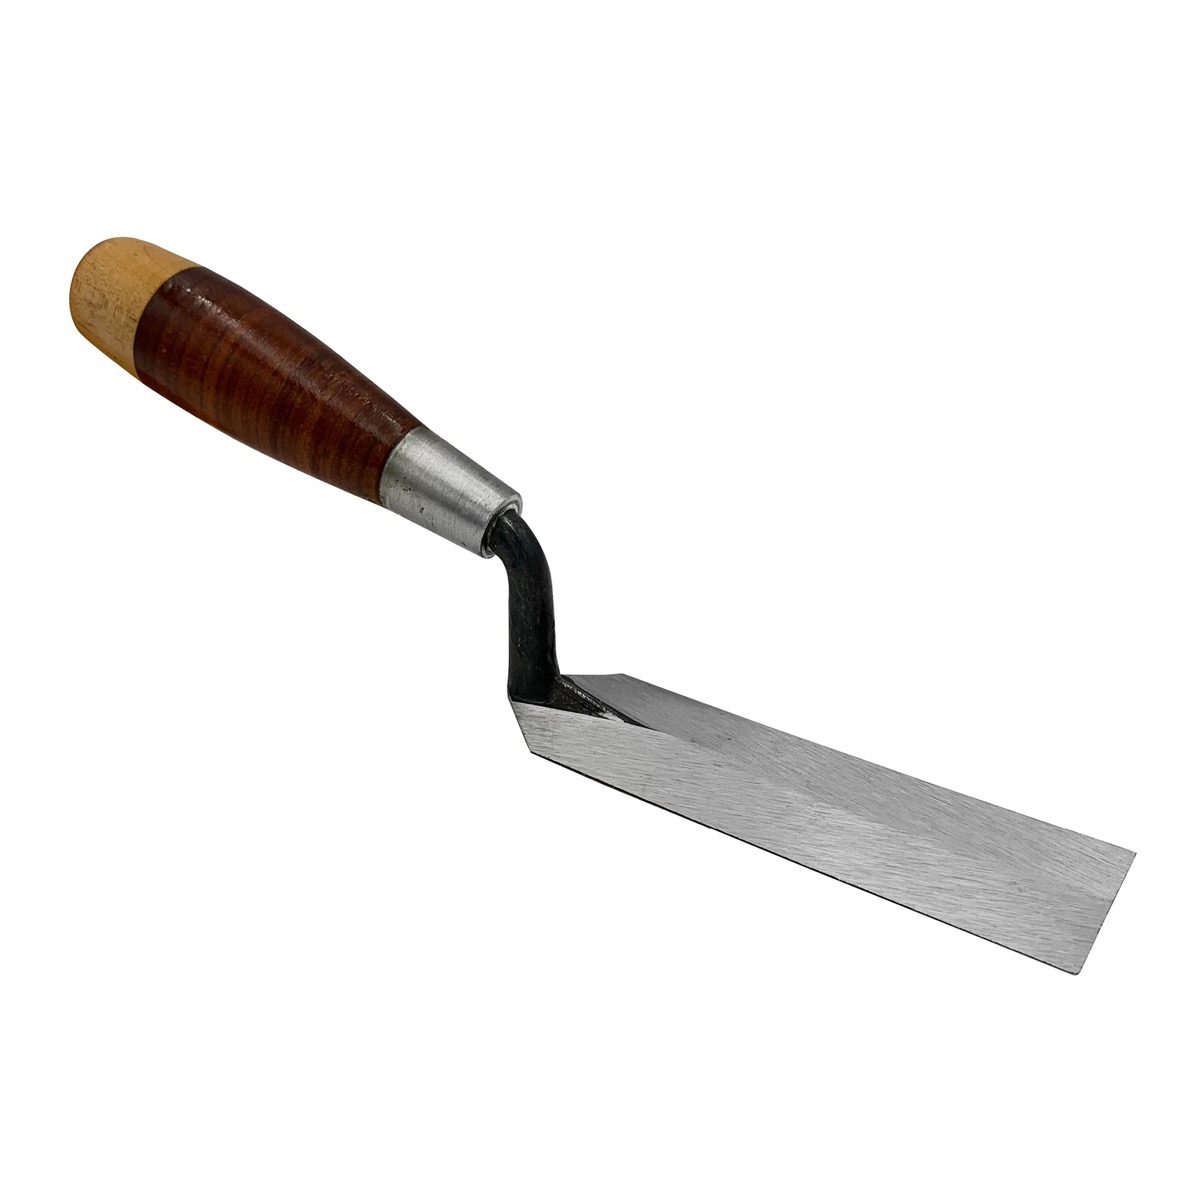 Margin Trowel for brick work or Archaeology. This Kraft product is available from Speedcrete, United Kingdom.